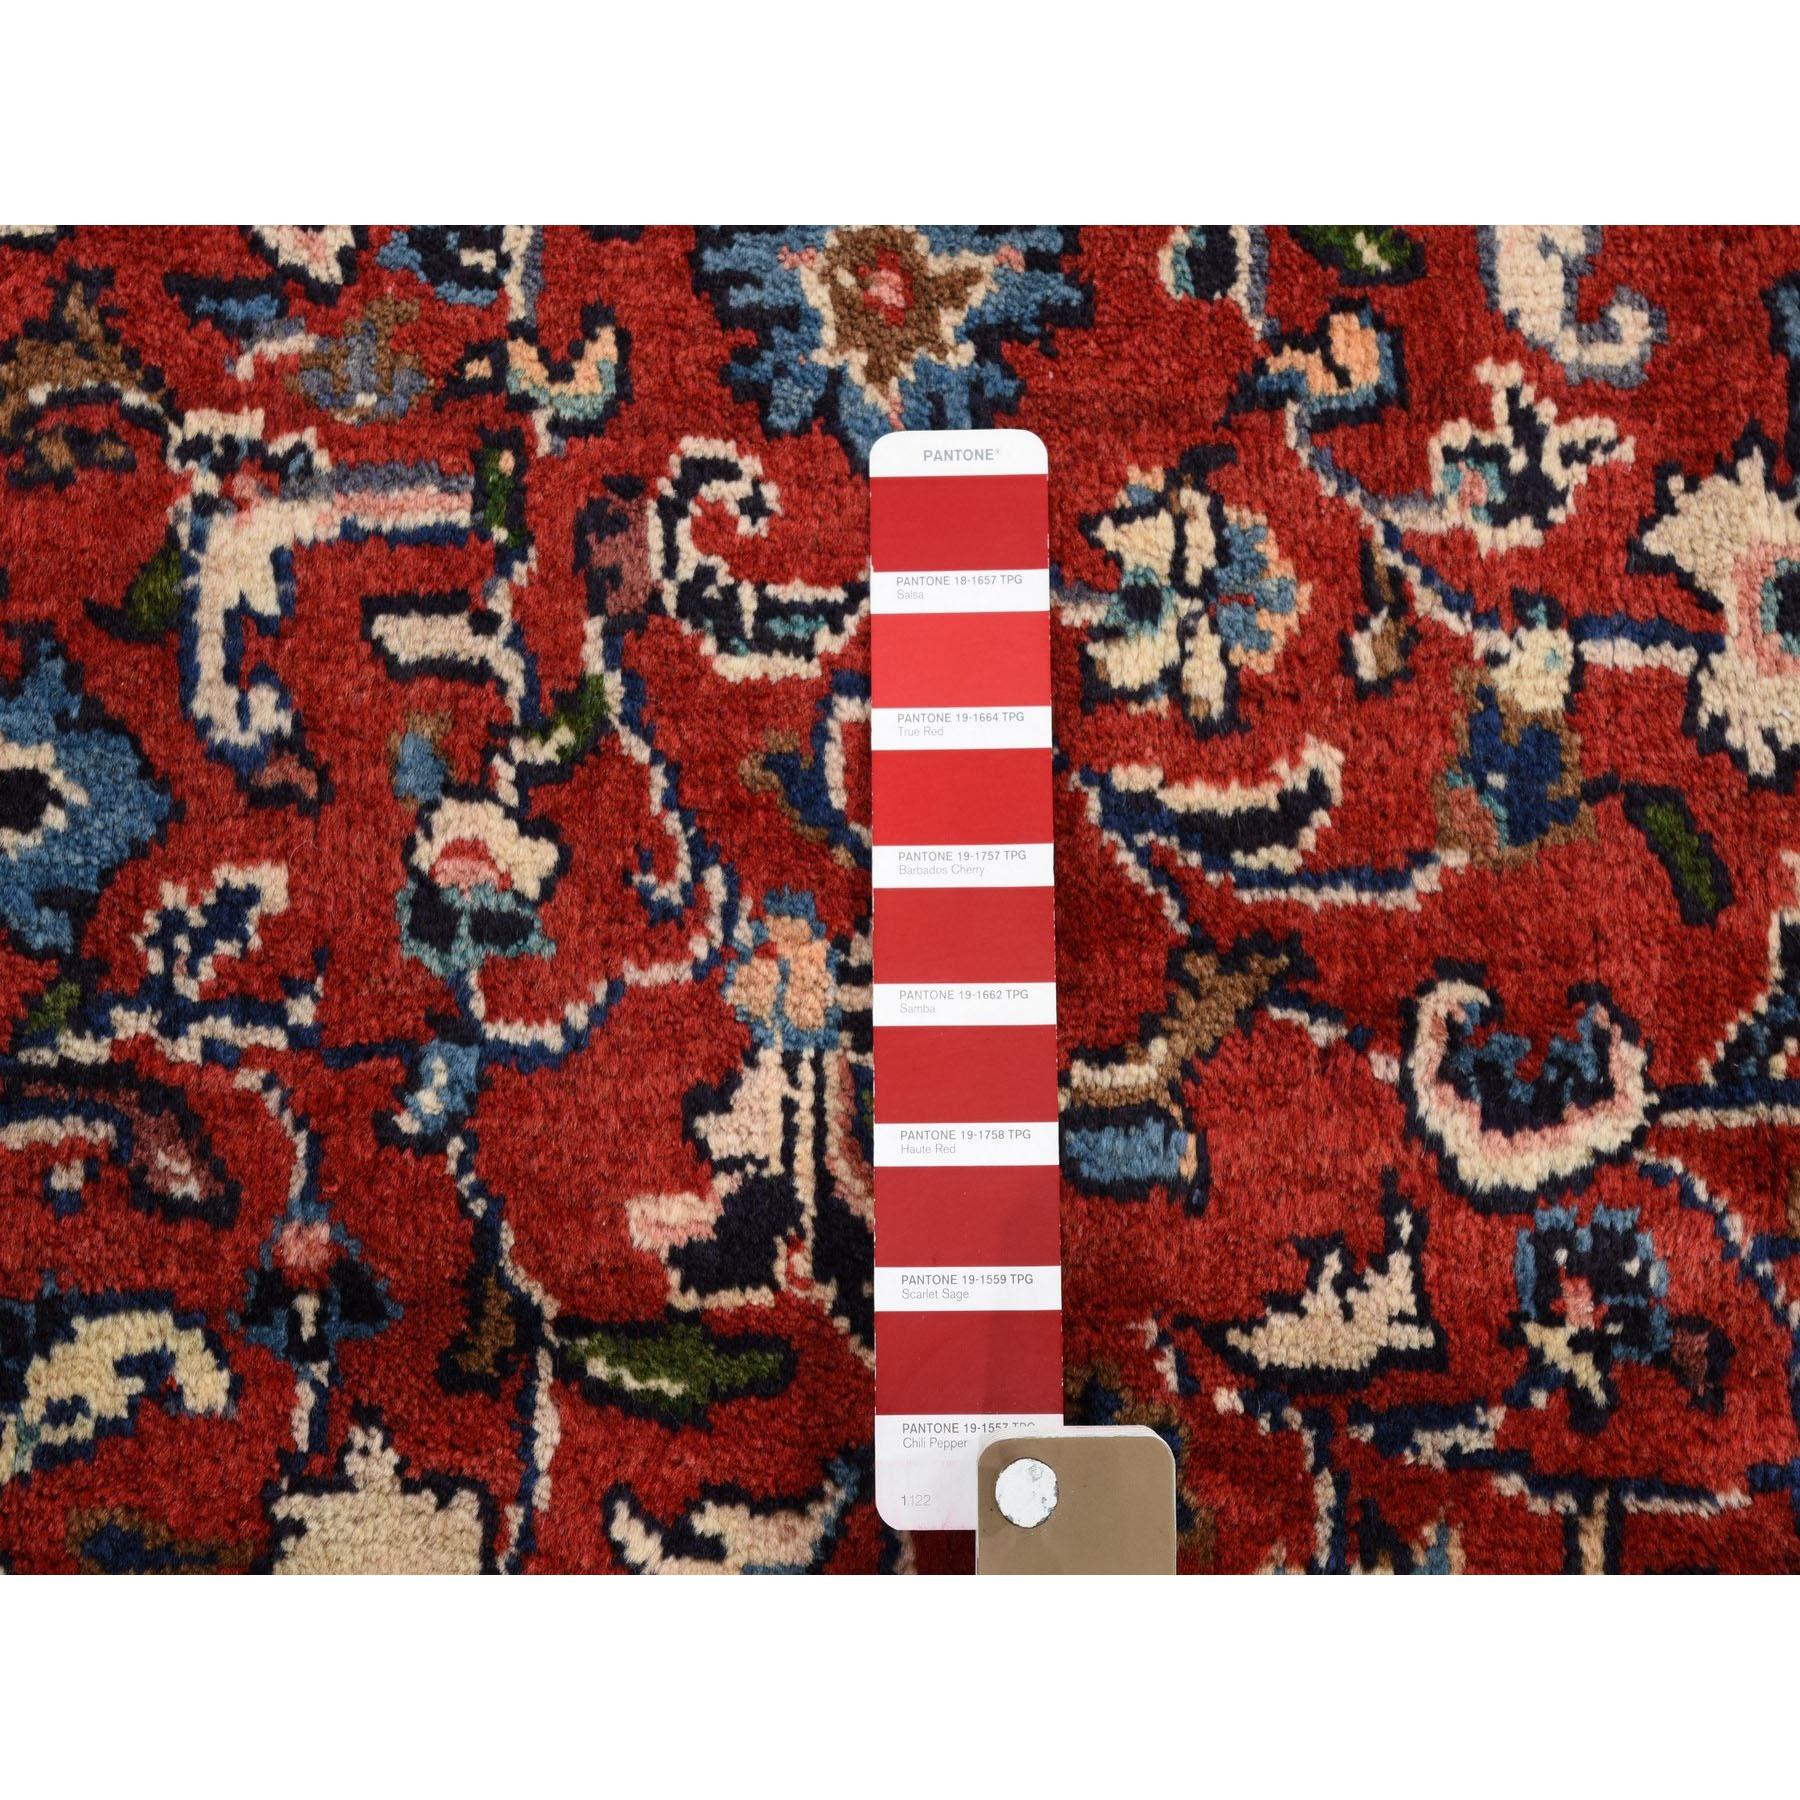 Red Persian Pure Wool Sarouk Mahal Hand Knotted Oriental Rug, 6'9